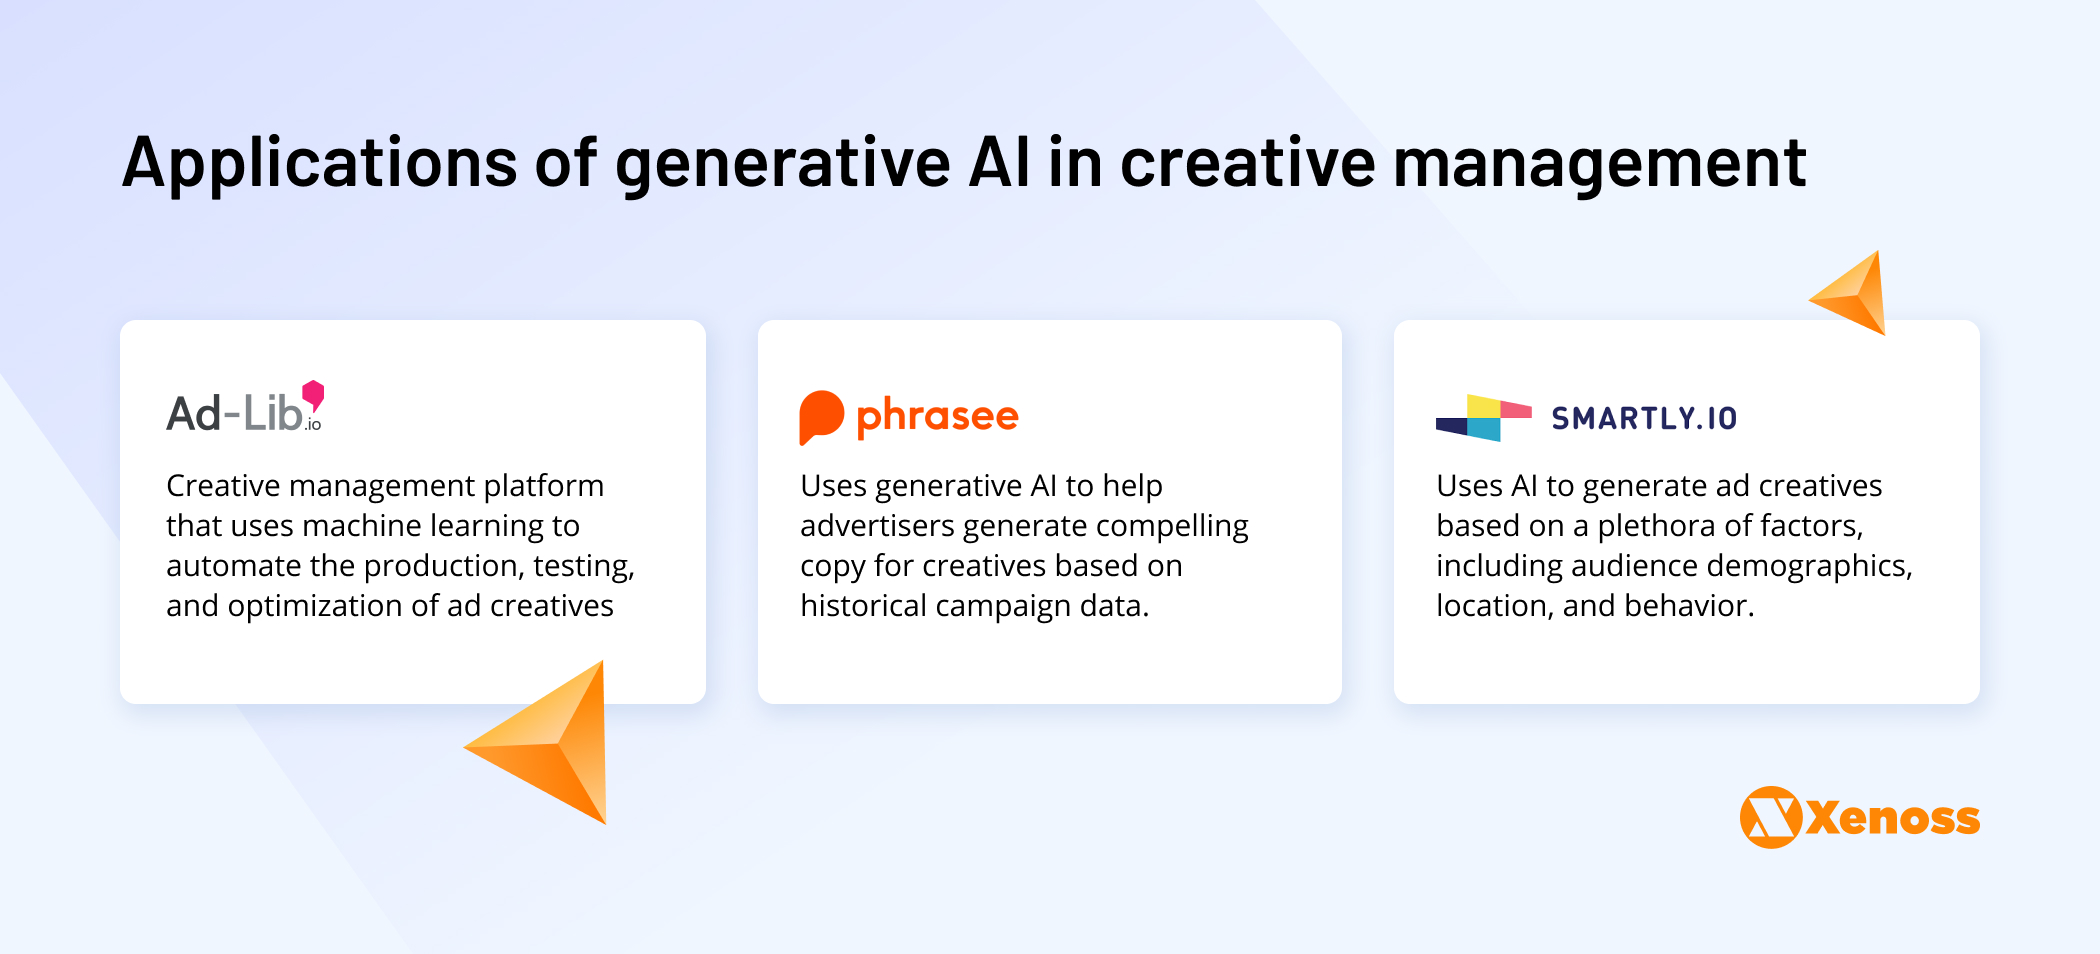 generative AI in creative management use cases | Xenoss Blog